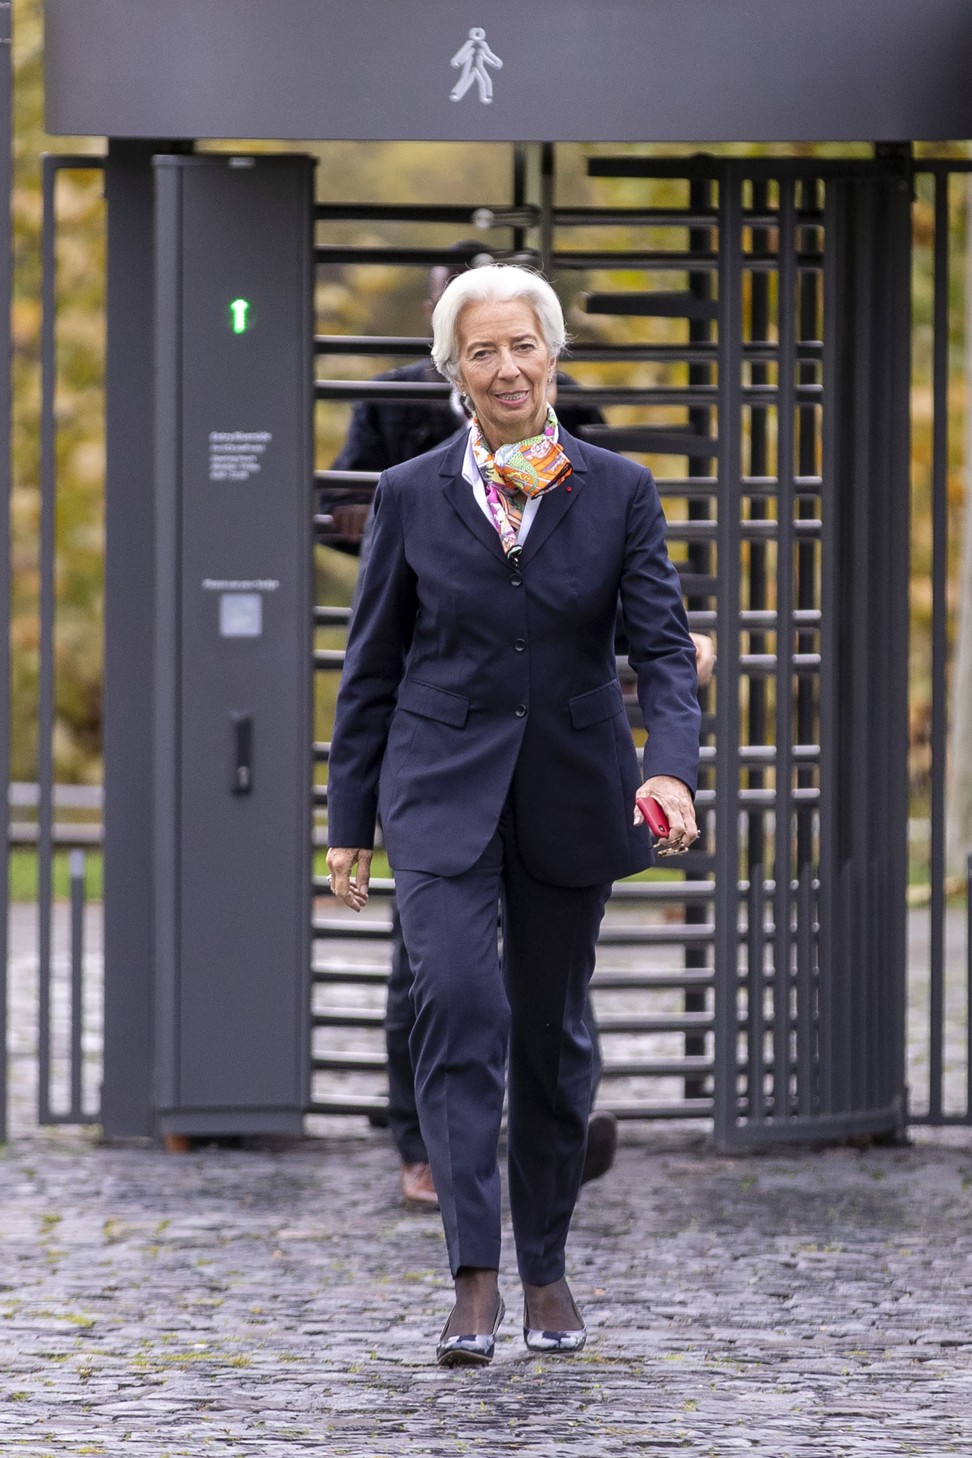 Christine Lagarde, the new president of the European Central Bank, passes through a turnstile gate as she arrives at the bank’s building in Frankfurt on November 4. Photo: Bloomberg